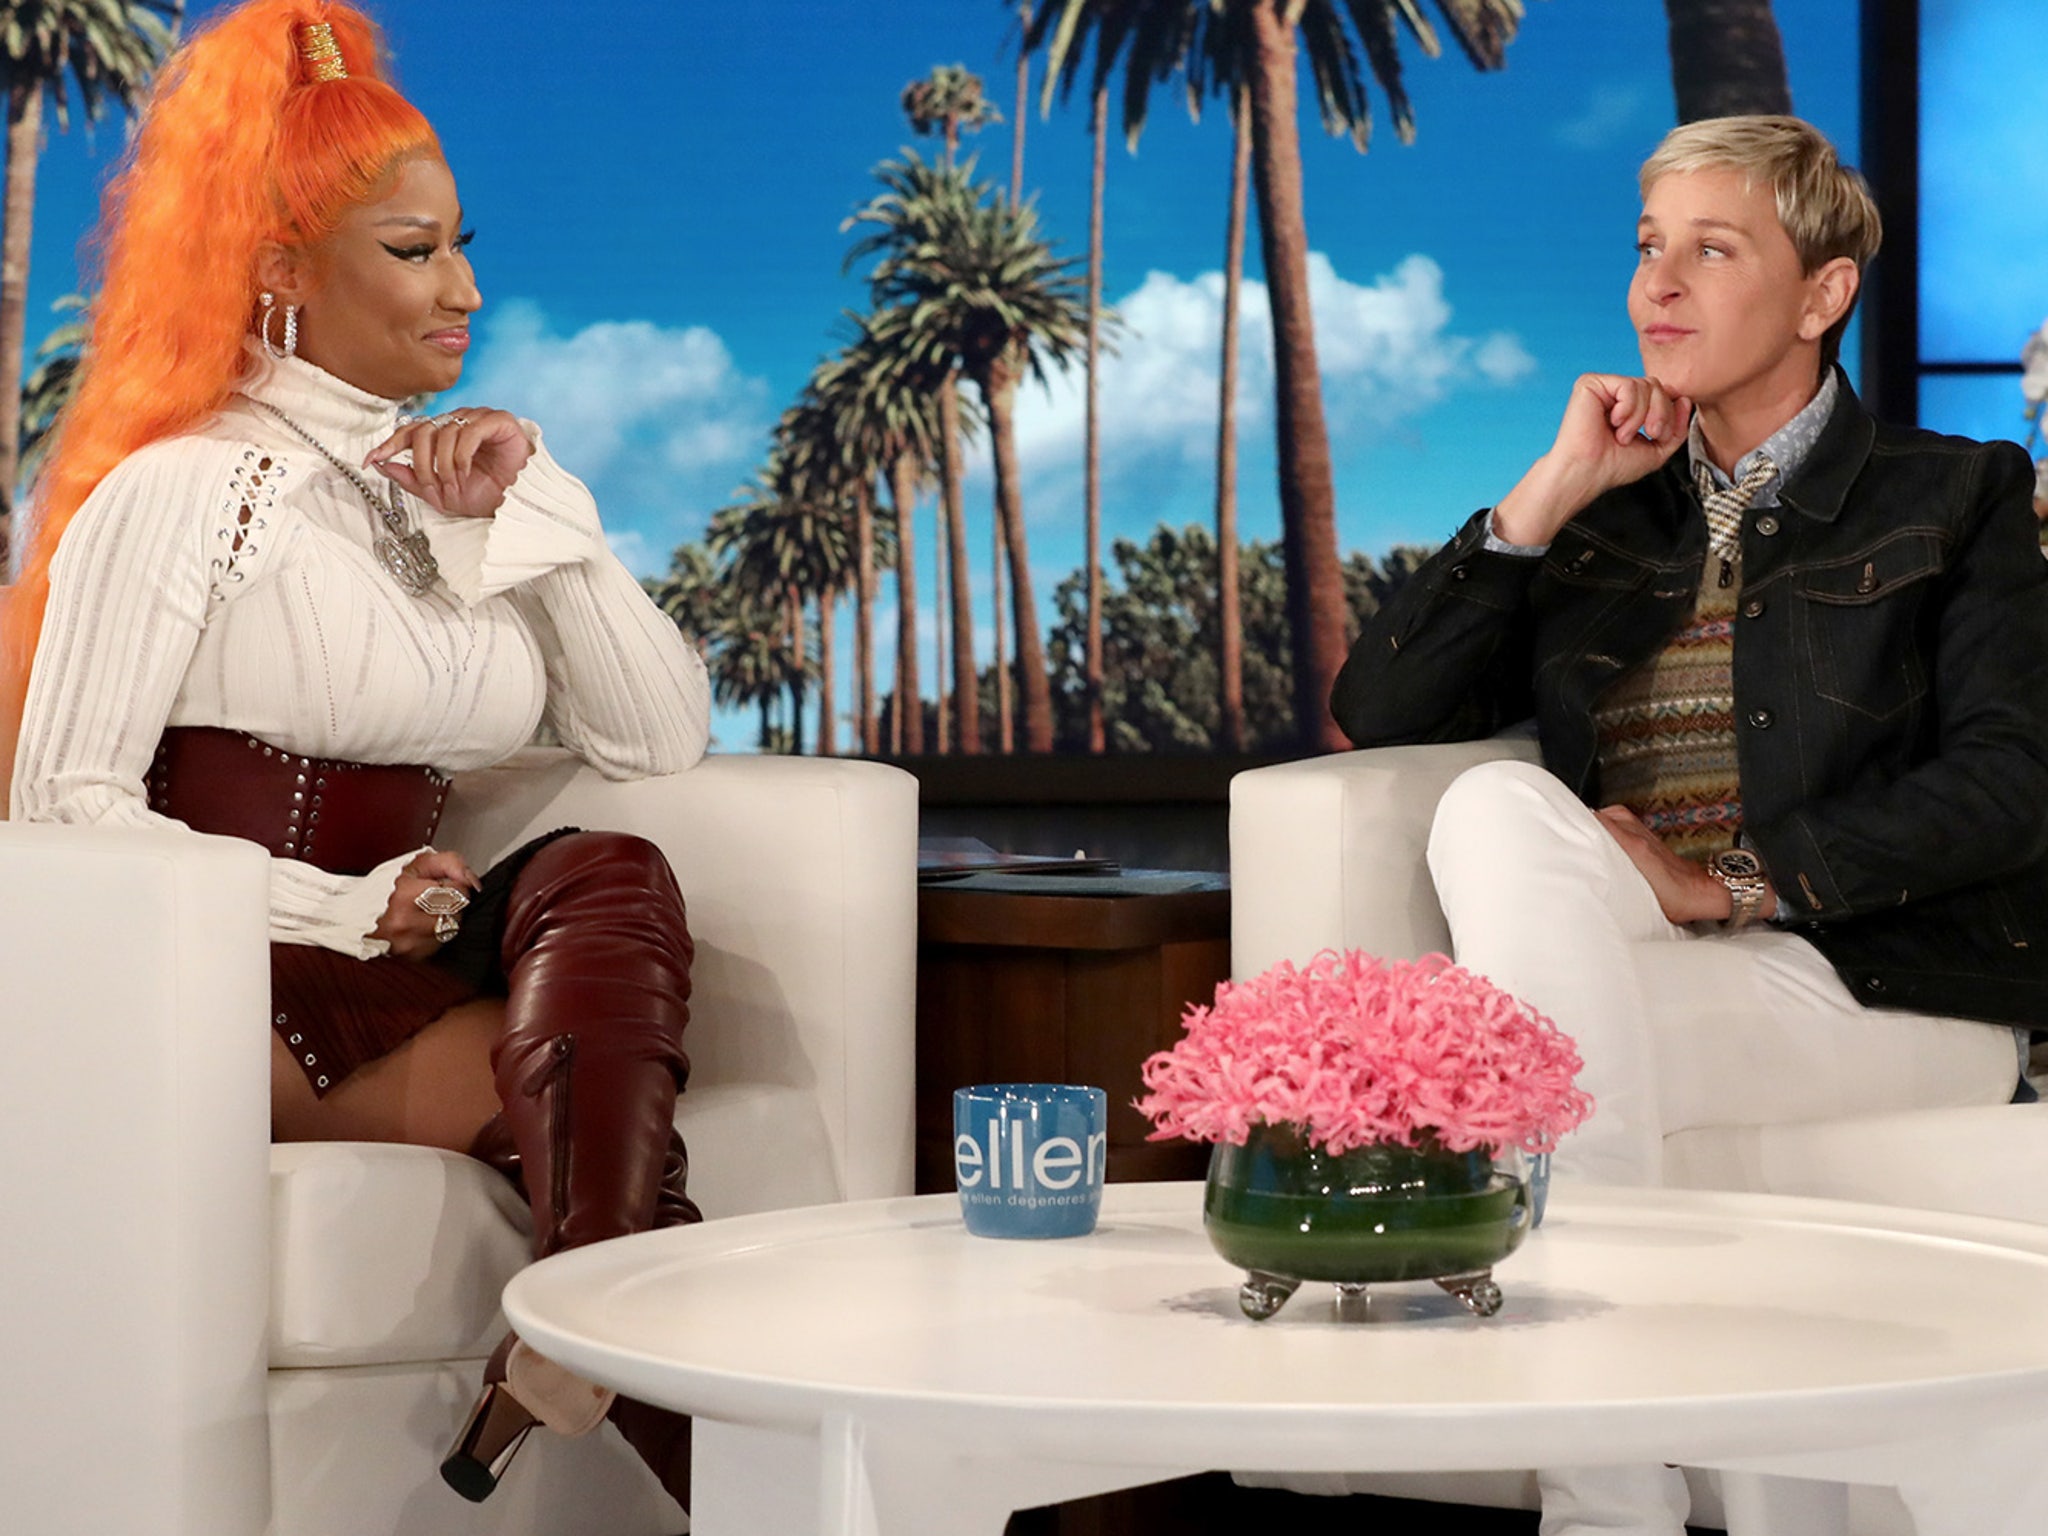 Nicki Minaj Tells Ellen DeGeneres She 'Wanted to Punch' Travis Scott and  Expects Men to Go '3 Times a Night' with Her in Bed